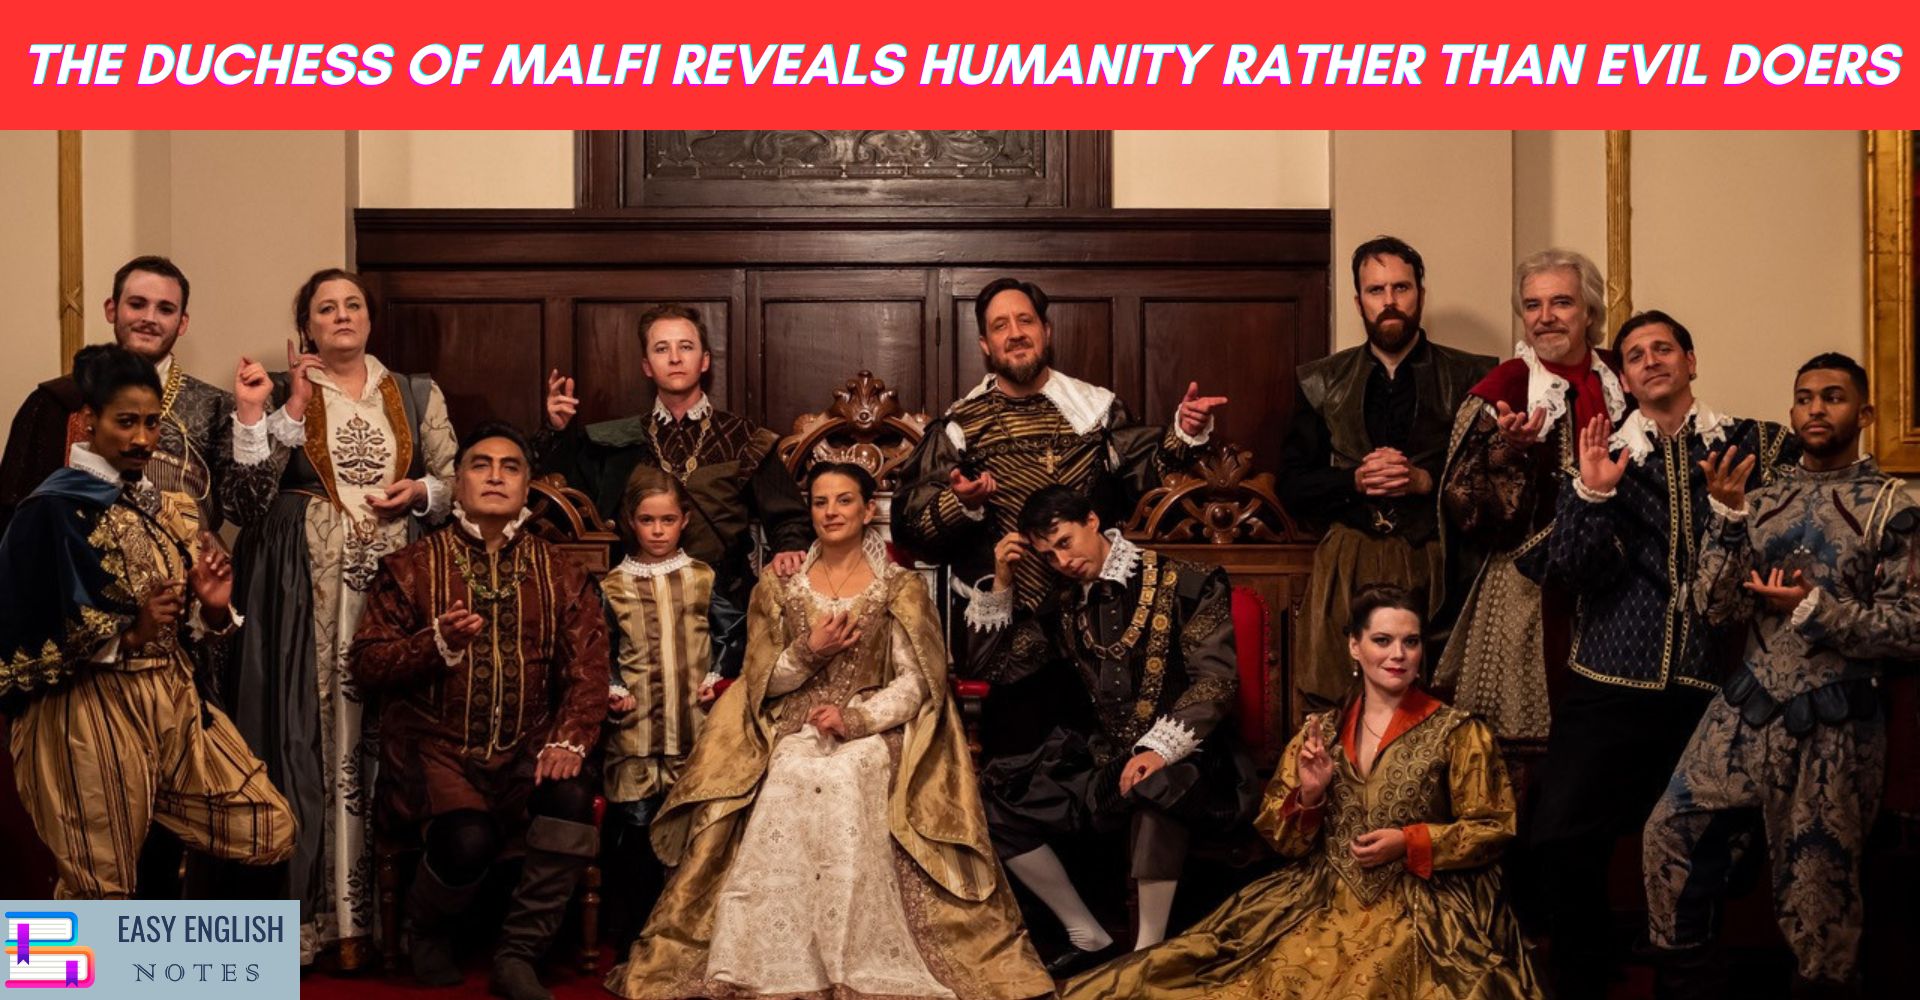 The Duchess of Malfi Reveals Humanity Rather Than Evil Doers